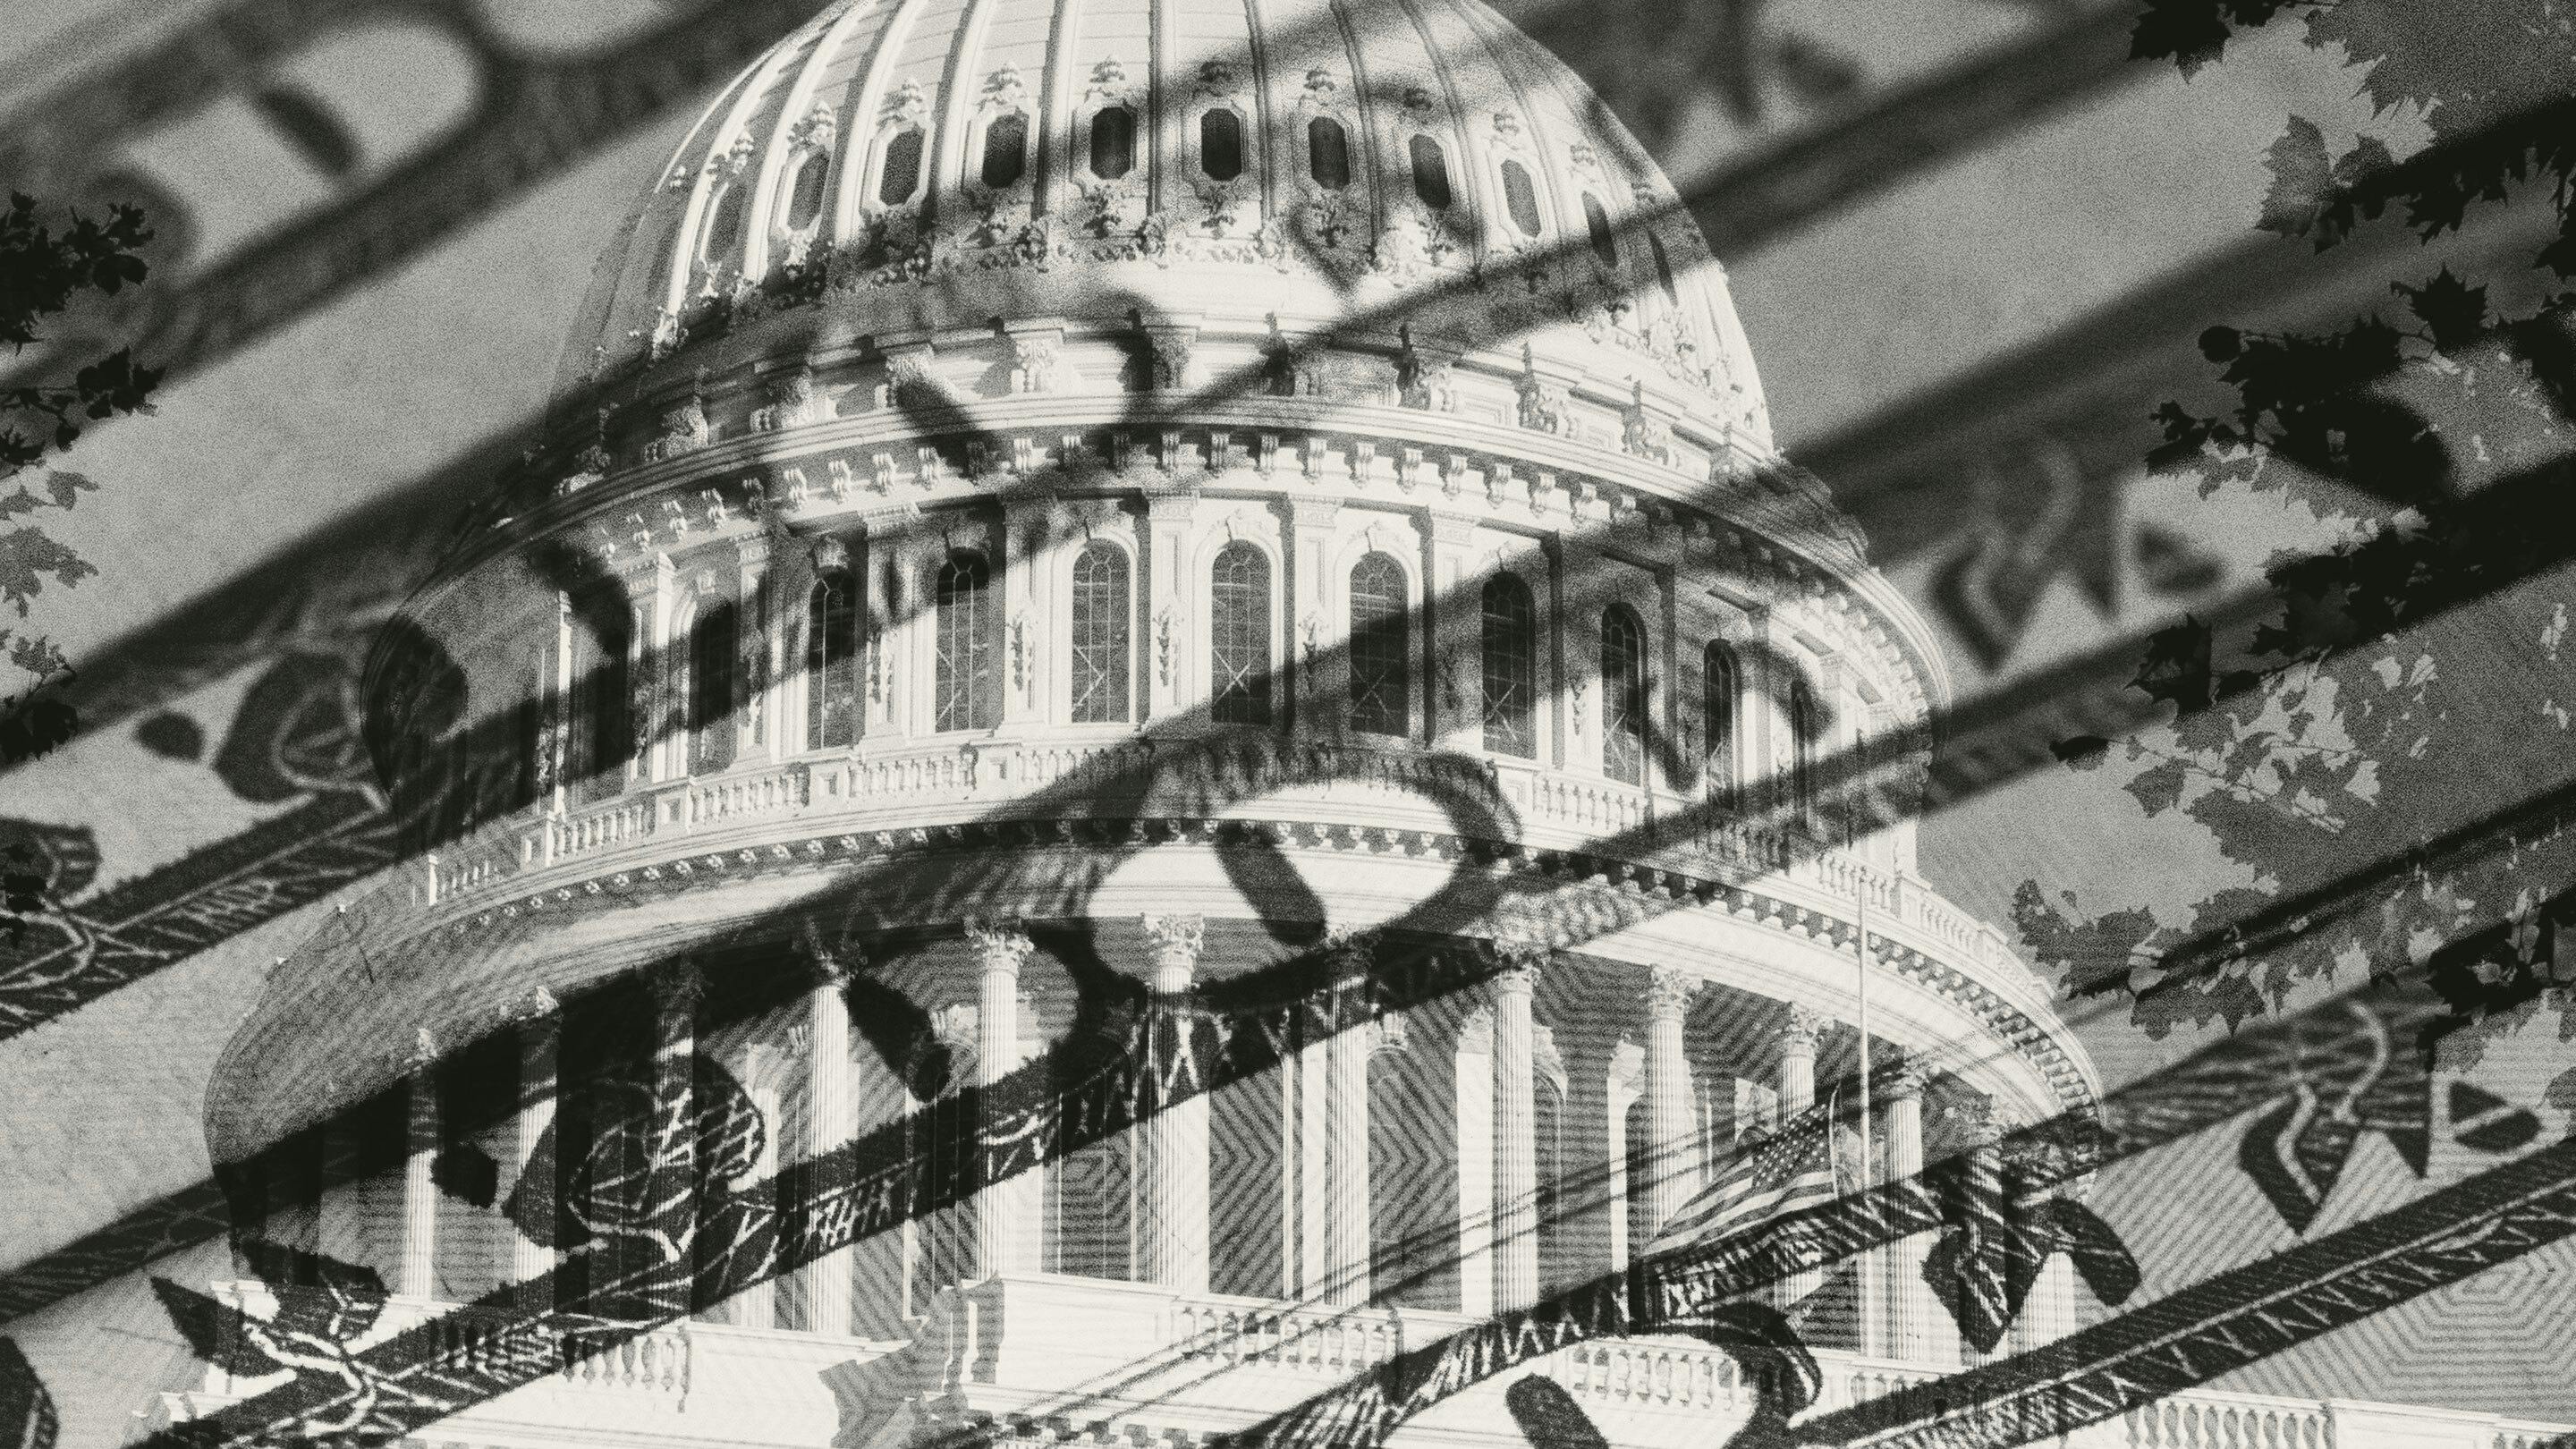 Stylize image of dollar bill superimposed on the US Capitol